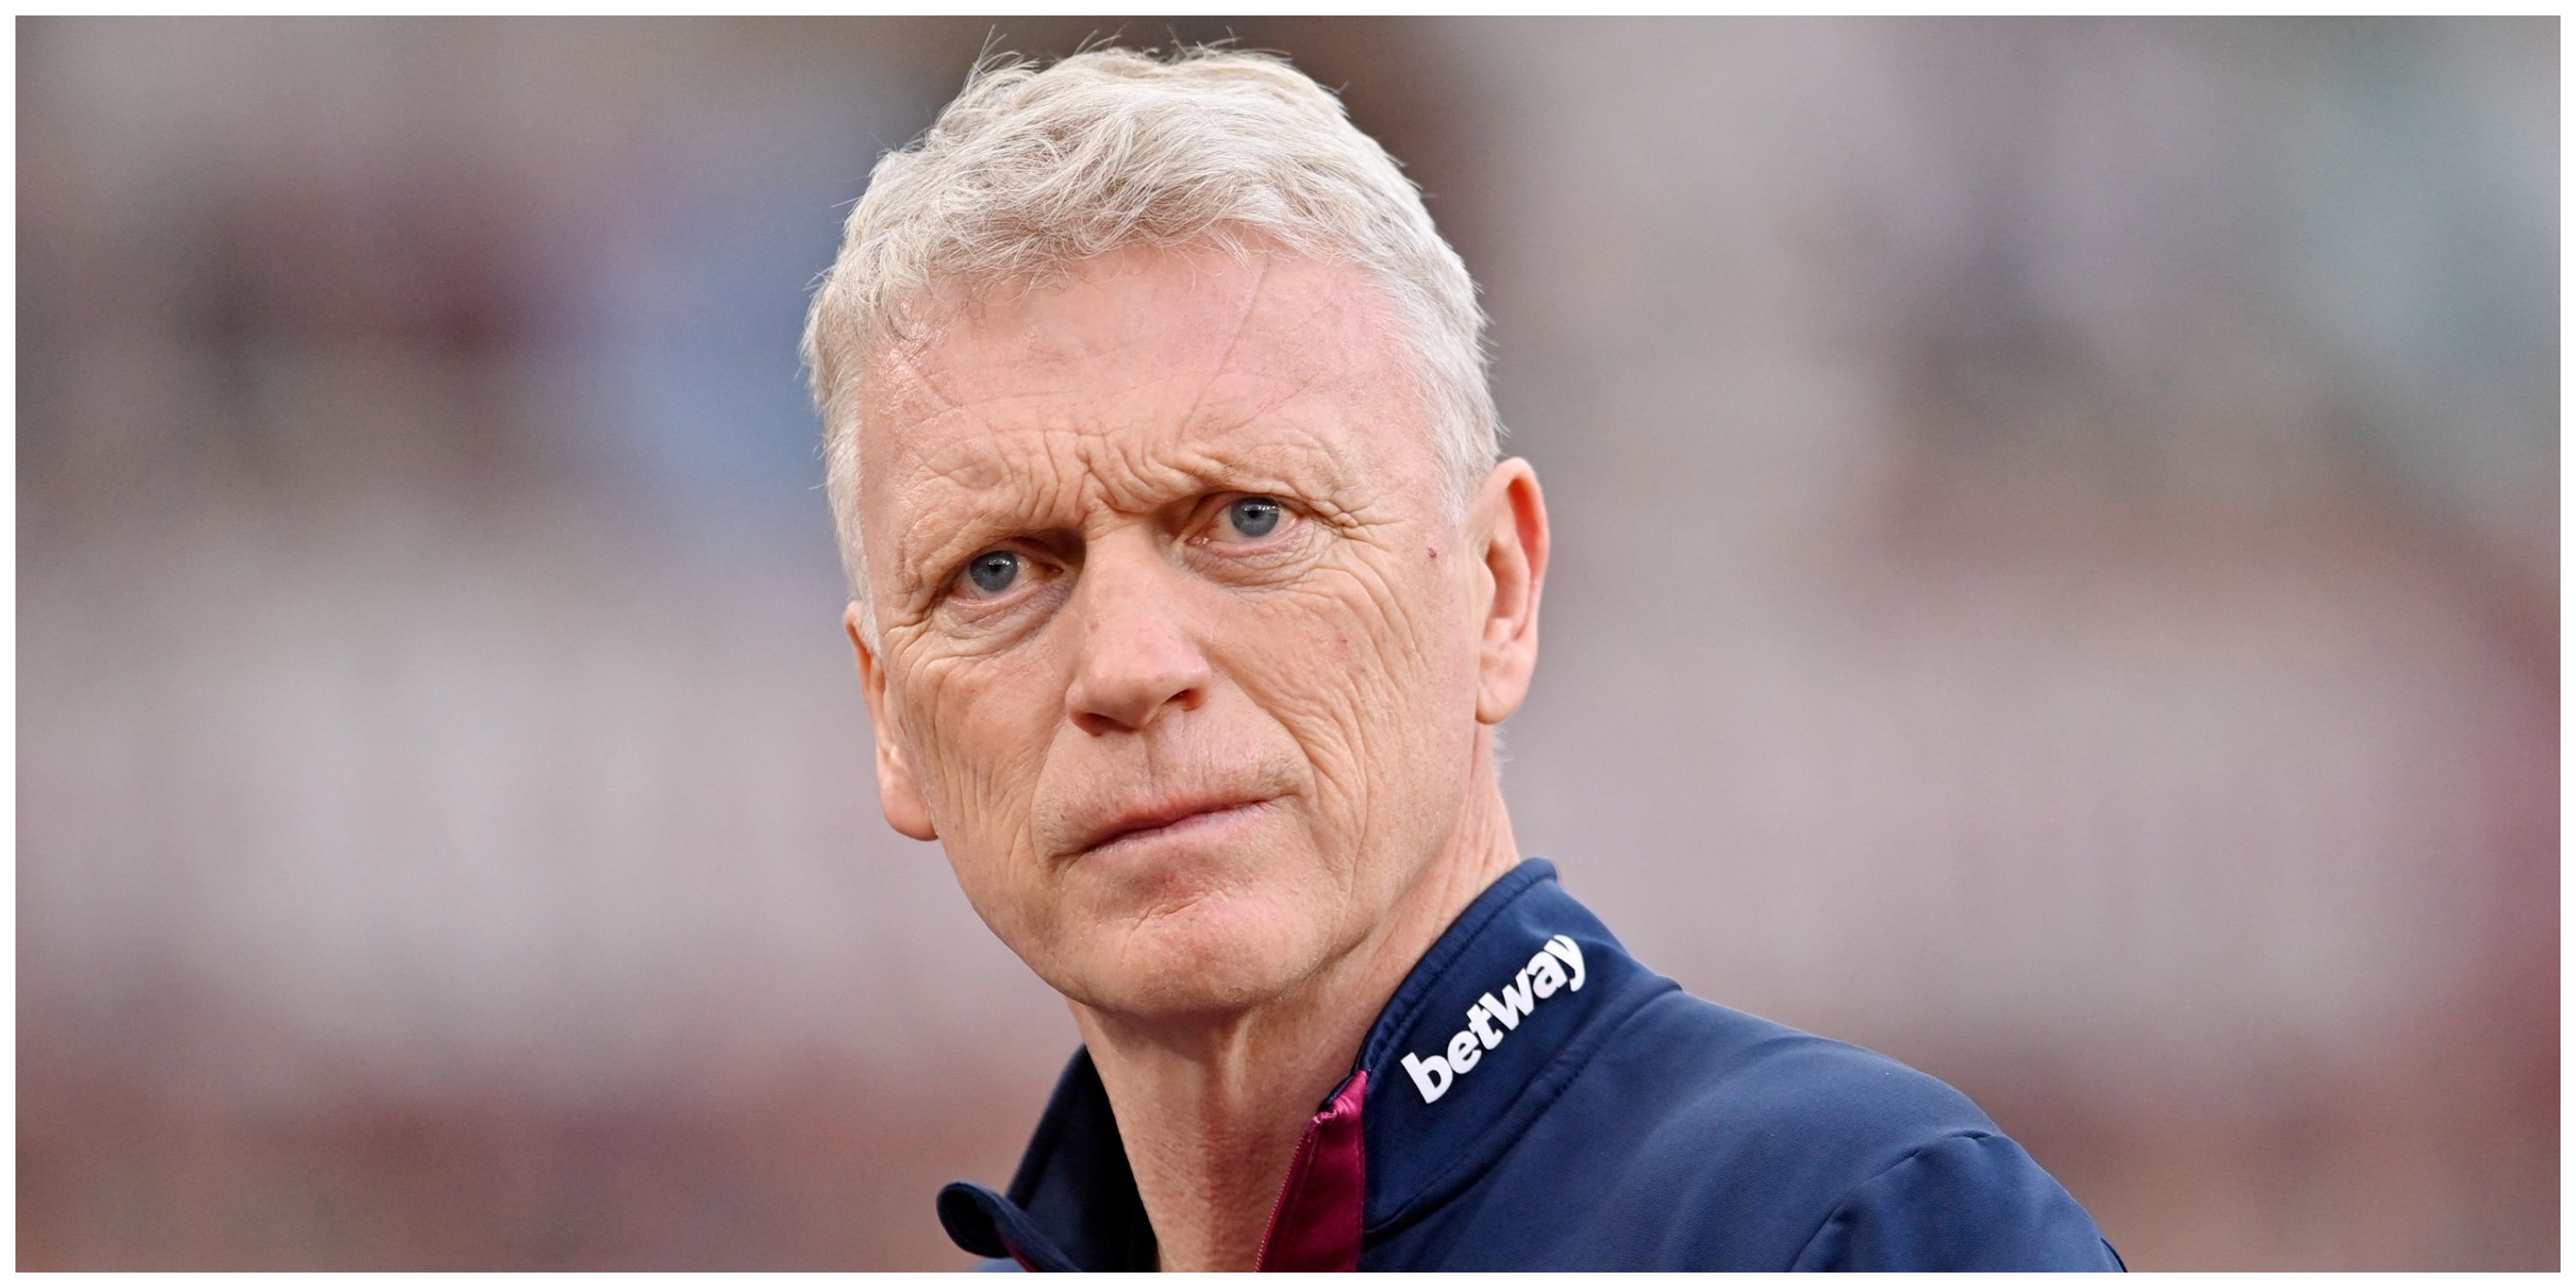 West Ham manager David Moyes looking serious